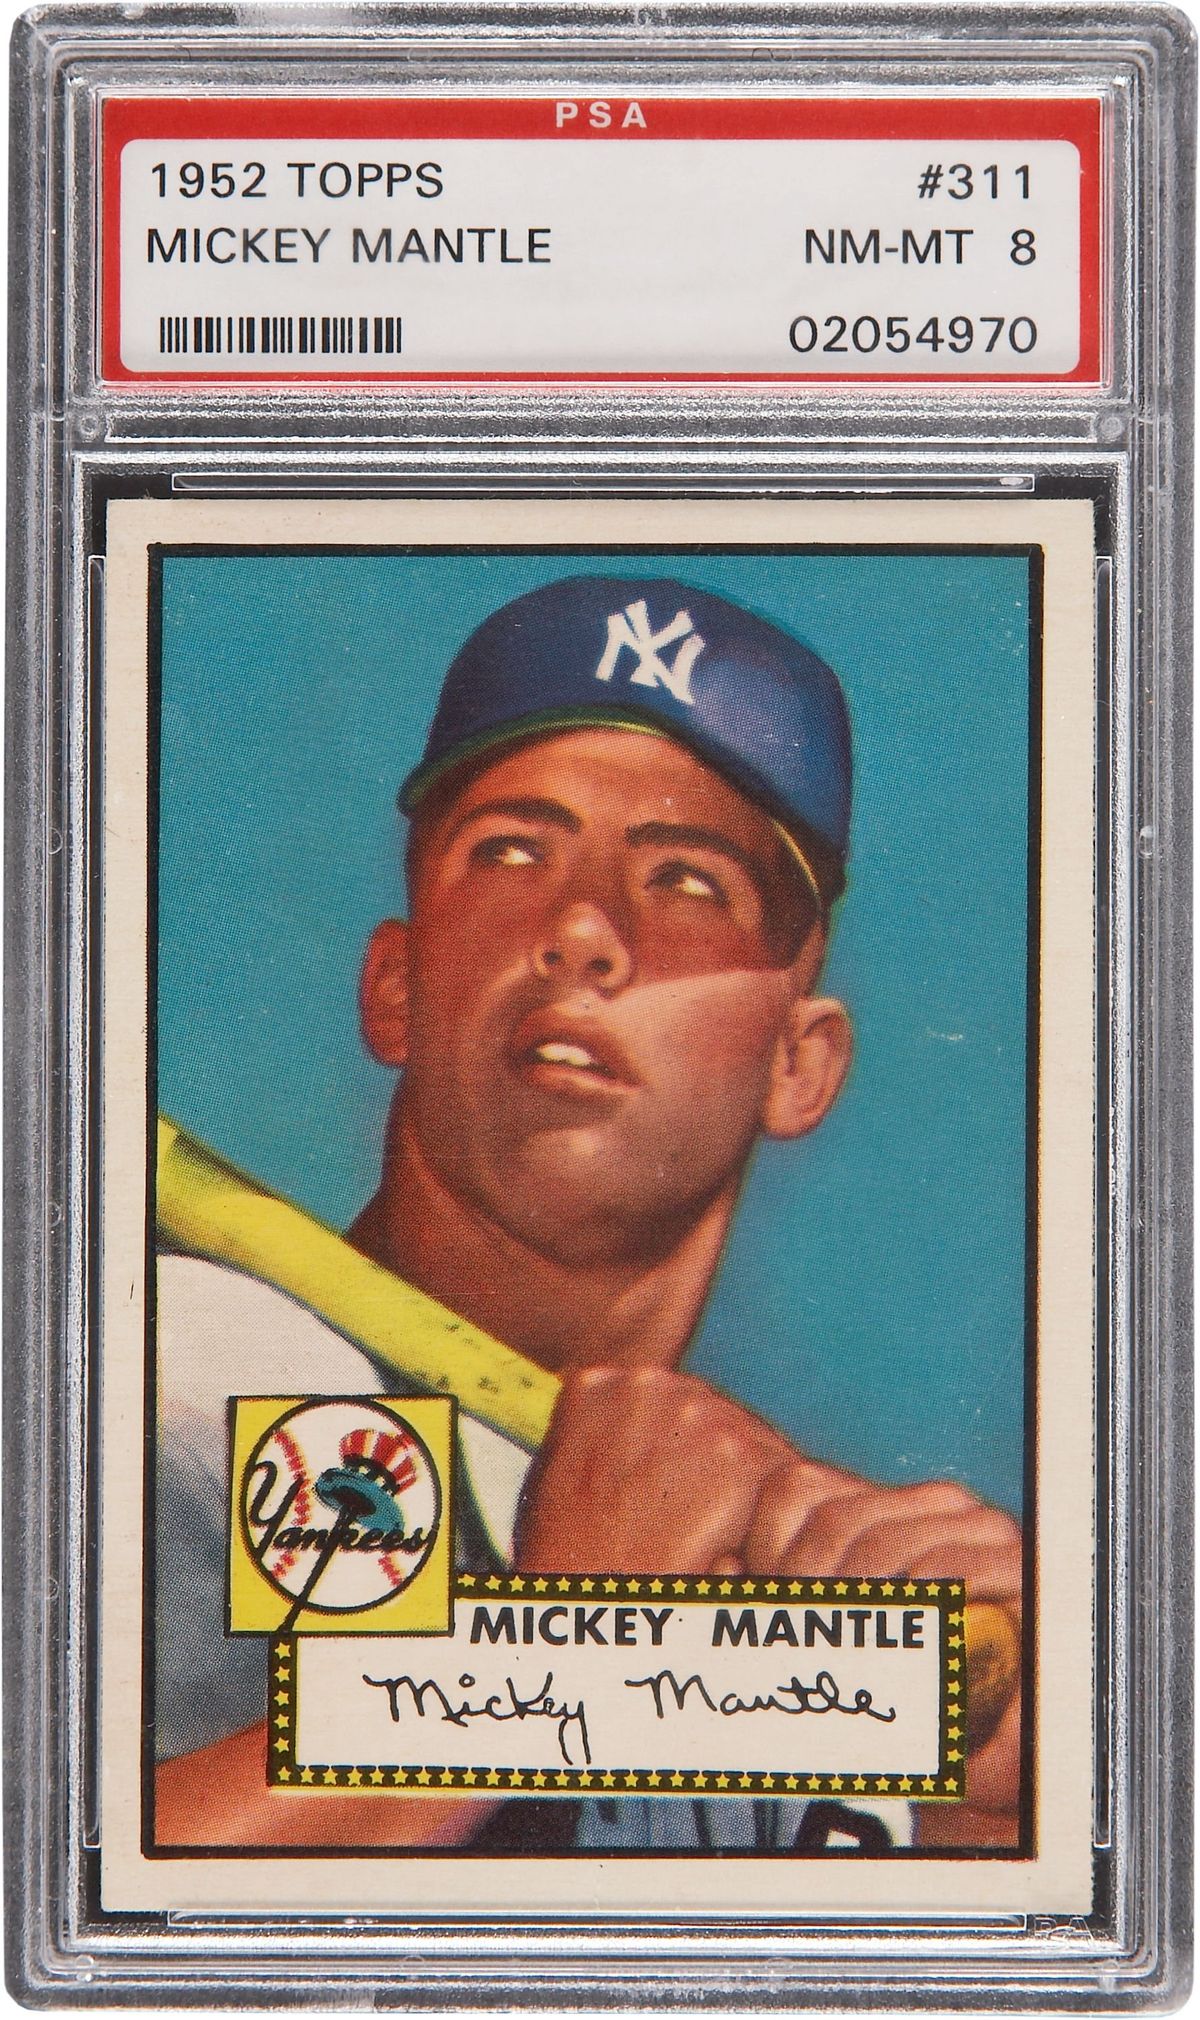 This is a higher-grade 1952 Topps Mickey Mantle rookie card. Associated Press photos (Associated Press photos)